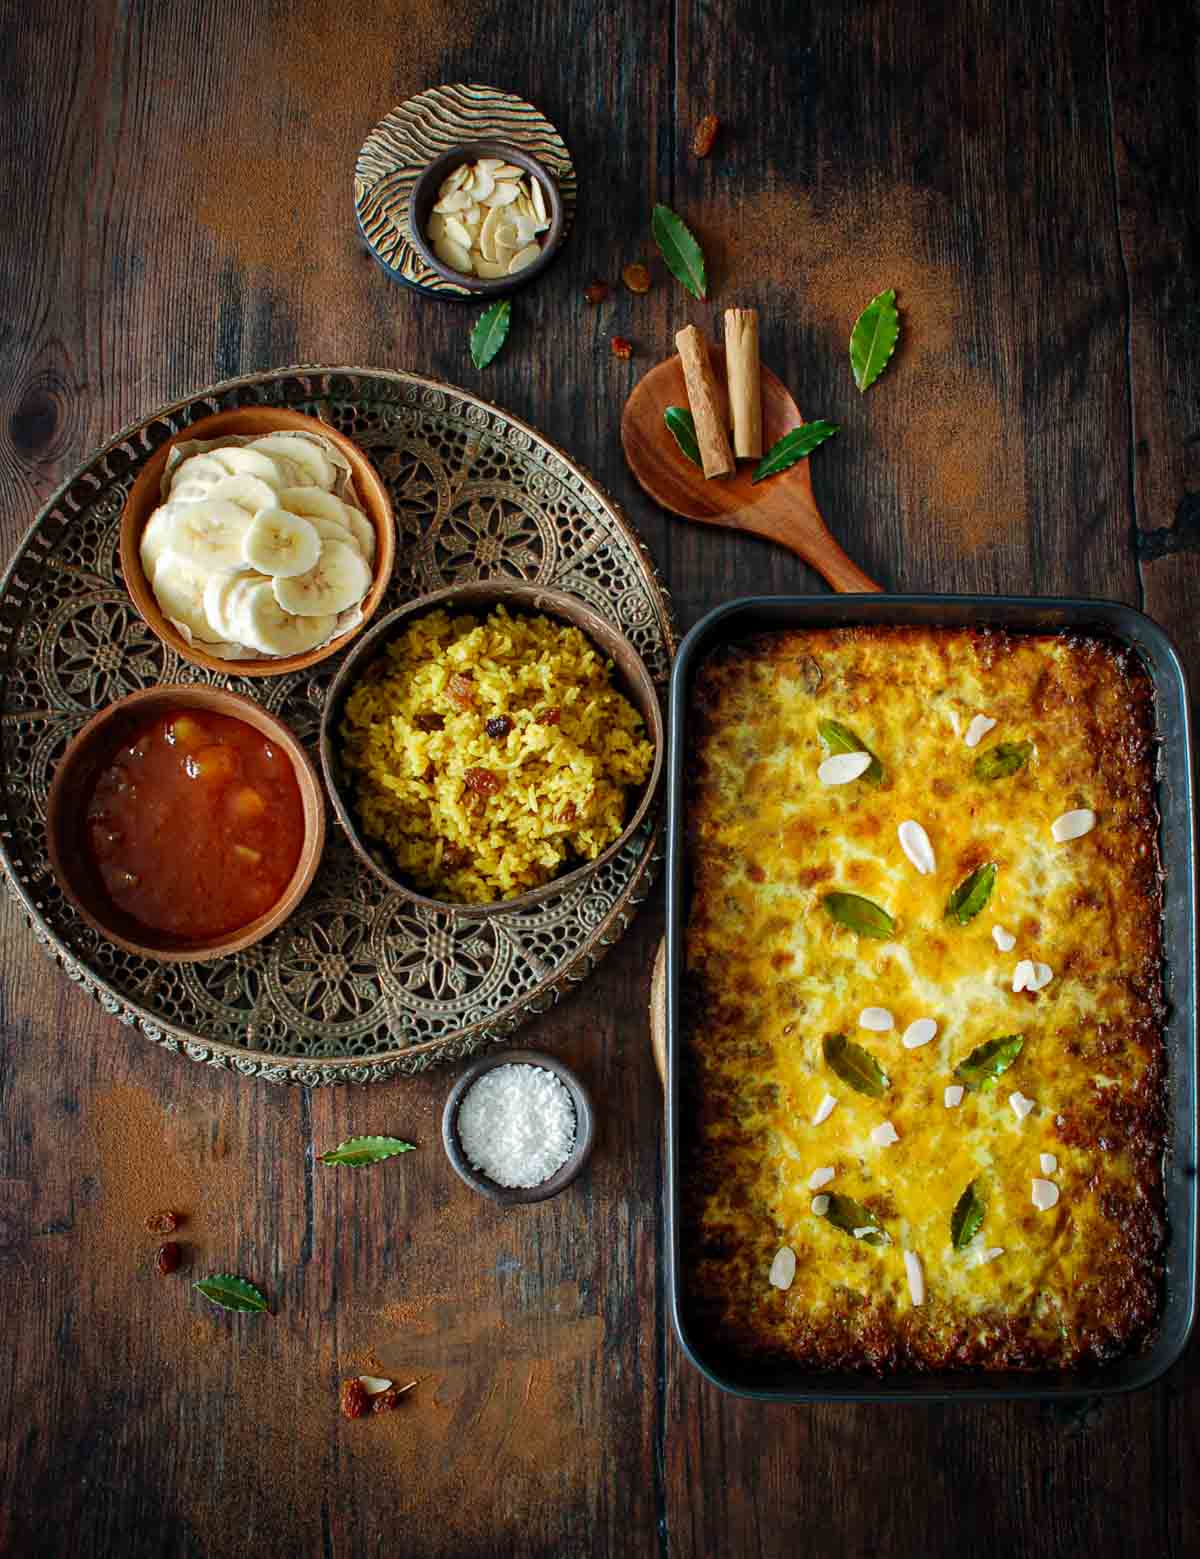 Cooked bobotie in an oven dish with side dishes of yellow rice, coconut, sliced banana and chutney